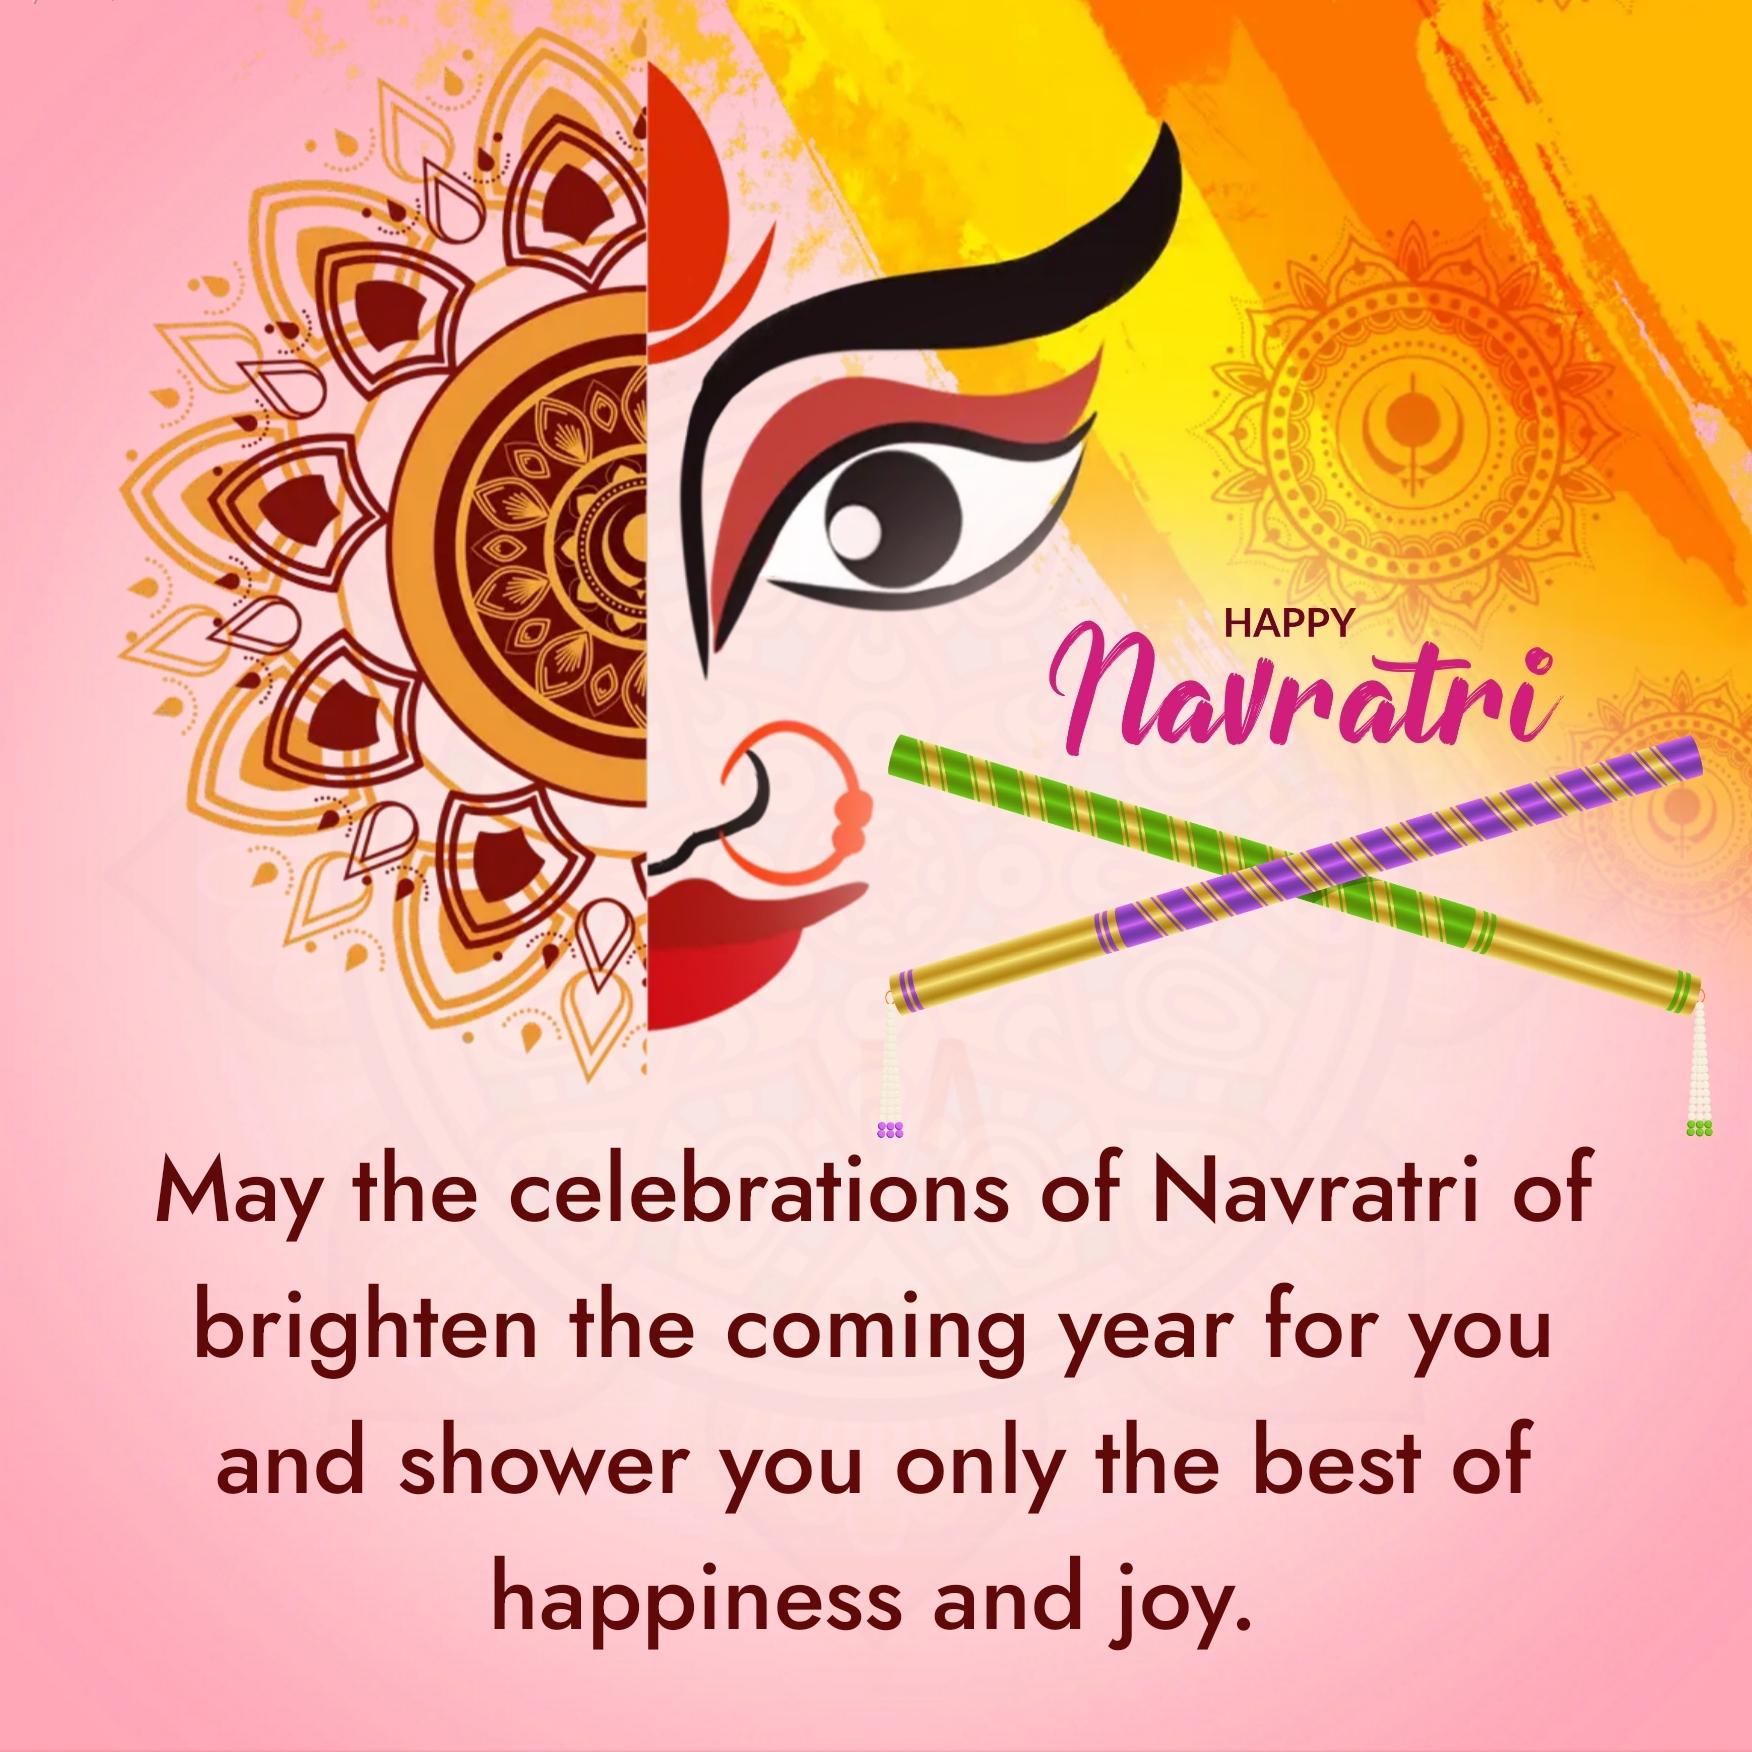 May the celebrations of Navratri of brighten the coming year